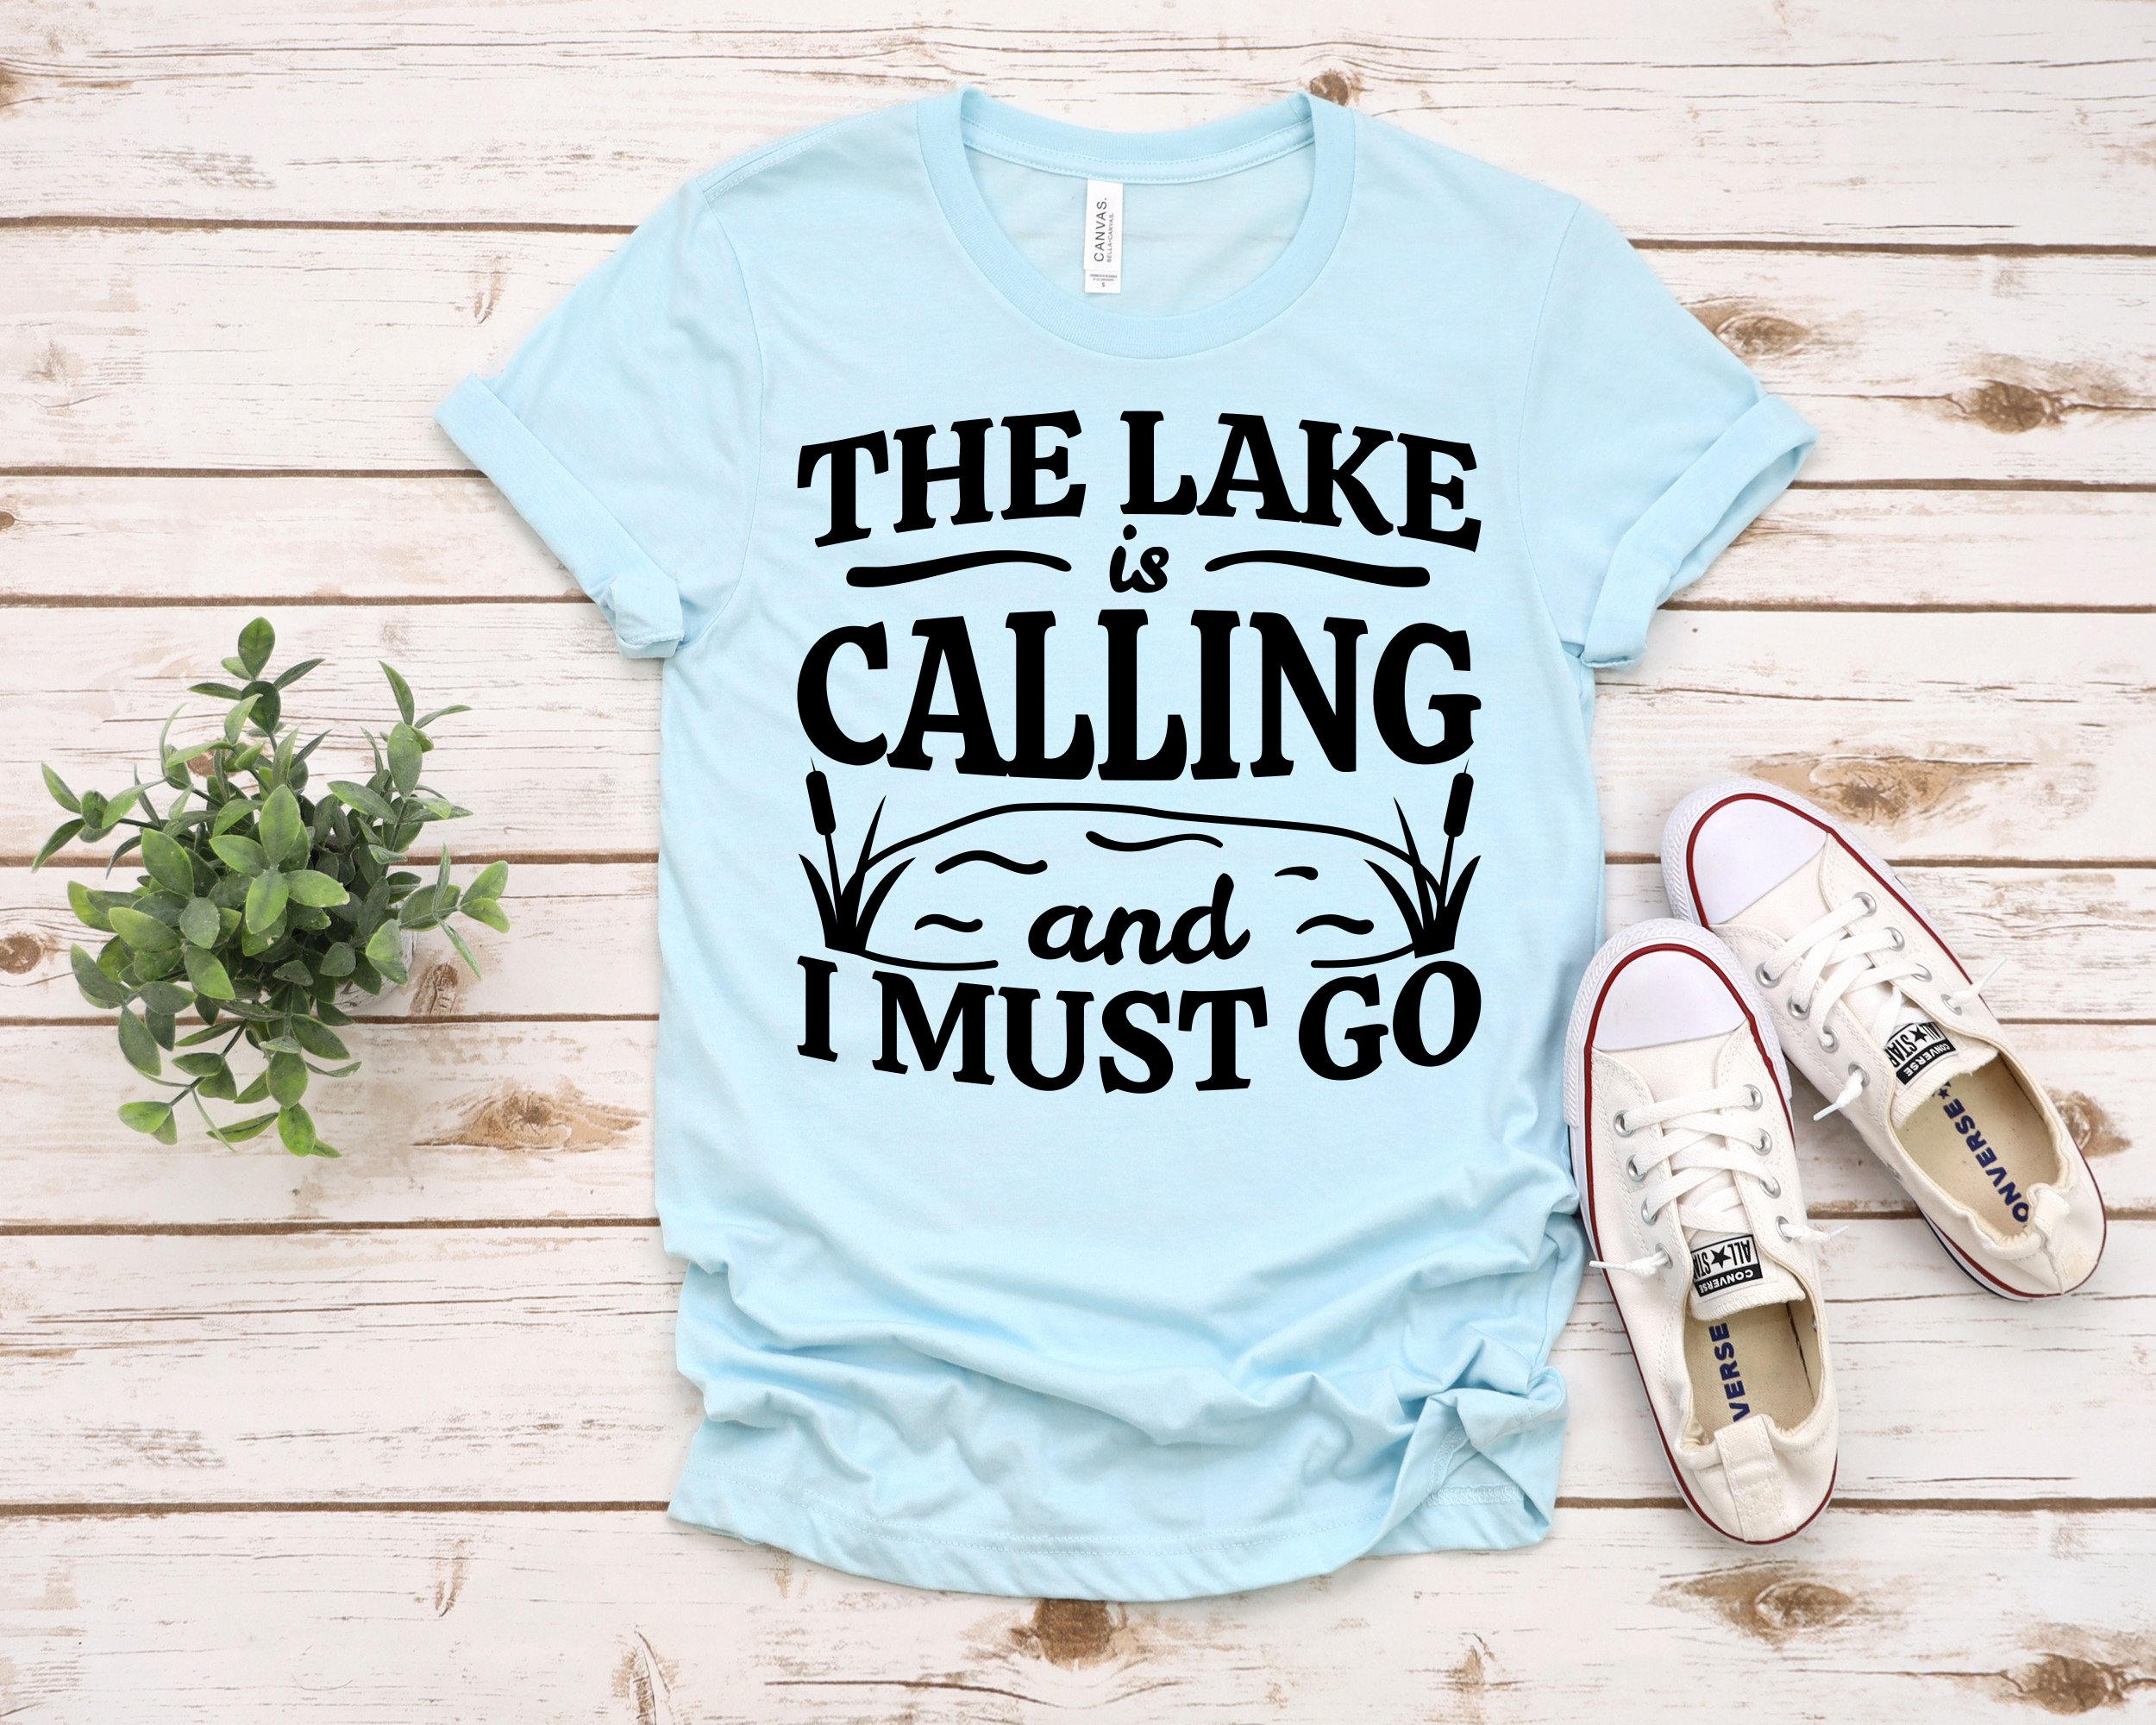 The lake is calling you.